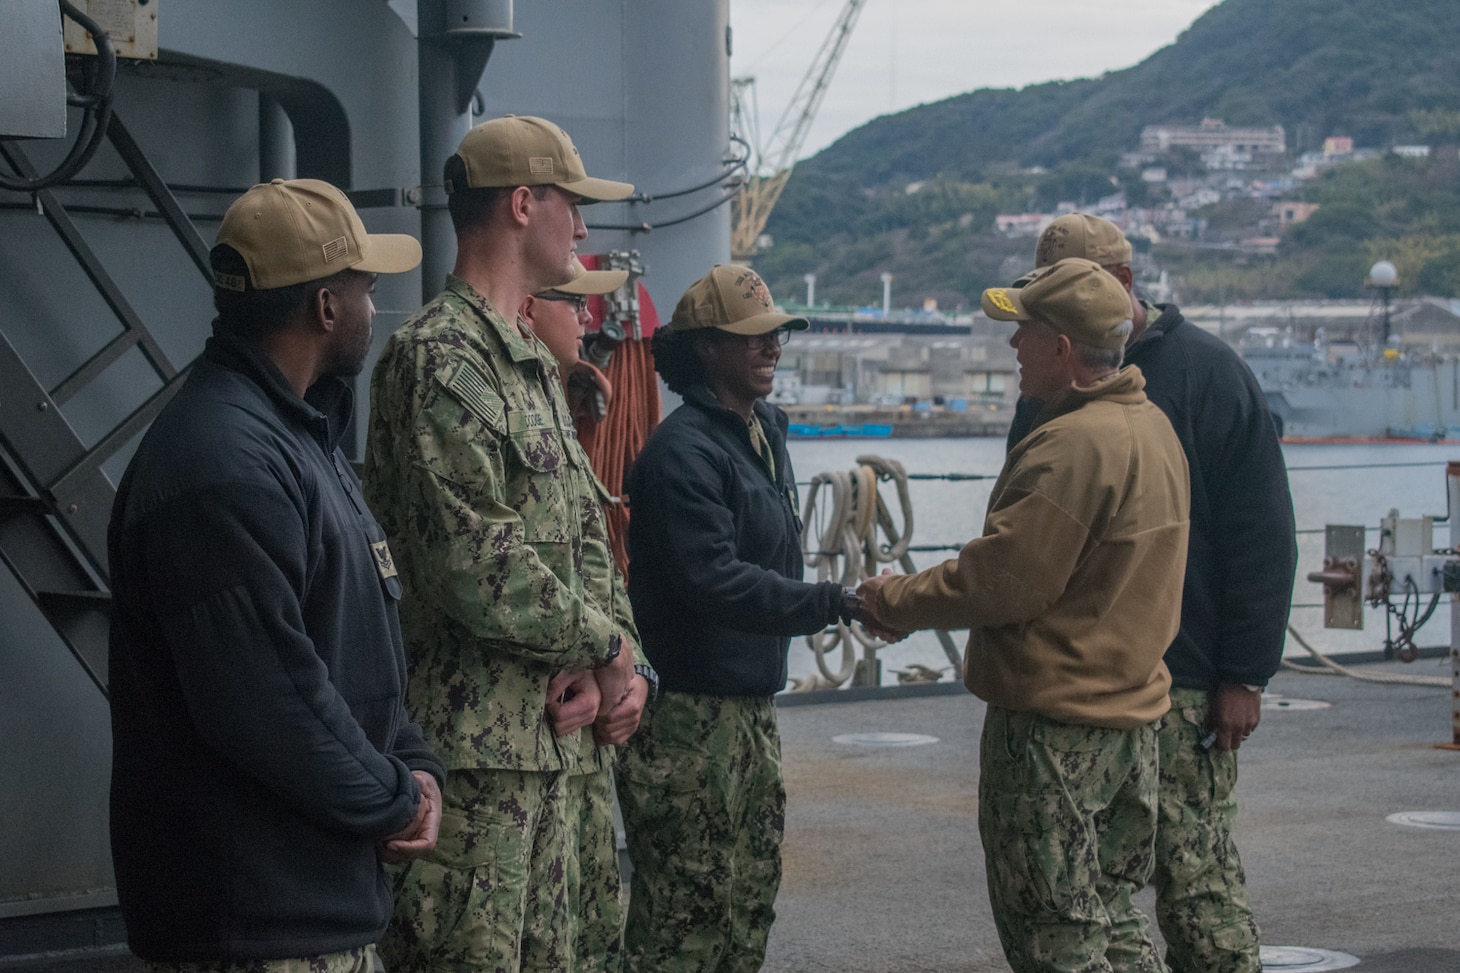 SASEBO, Japan (Jan. 9, 2019) Vice Adm. Phil Sawyer, the U.S. 7th Fleet commander, presents a coin to Culinary Specialist 3rd Class Latia Gill, assigned to the amphibious dock landing ship USS Ashland (LSD 48), during a waterfront visit to forward deployed naval forces operating out of Fleet Activities Sasebo, Japan.